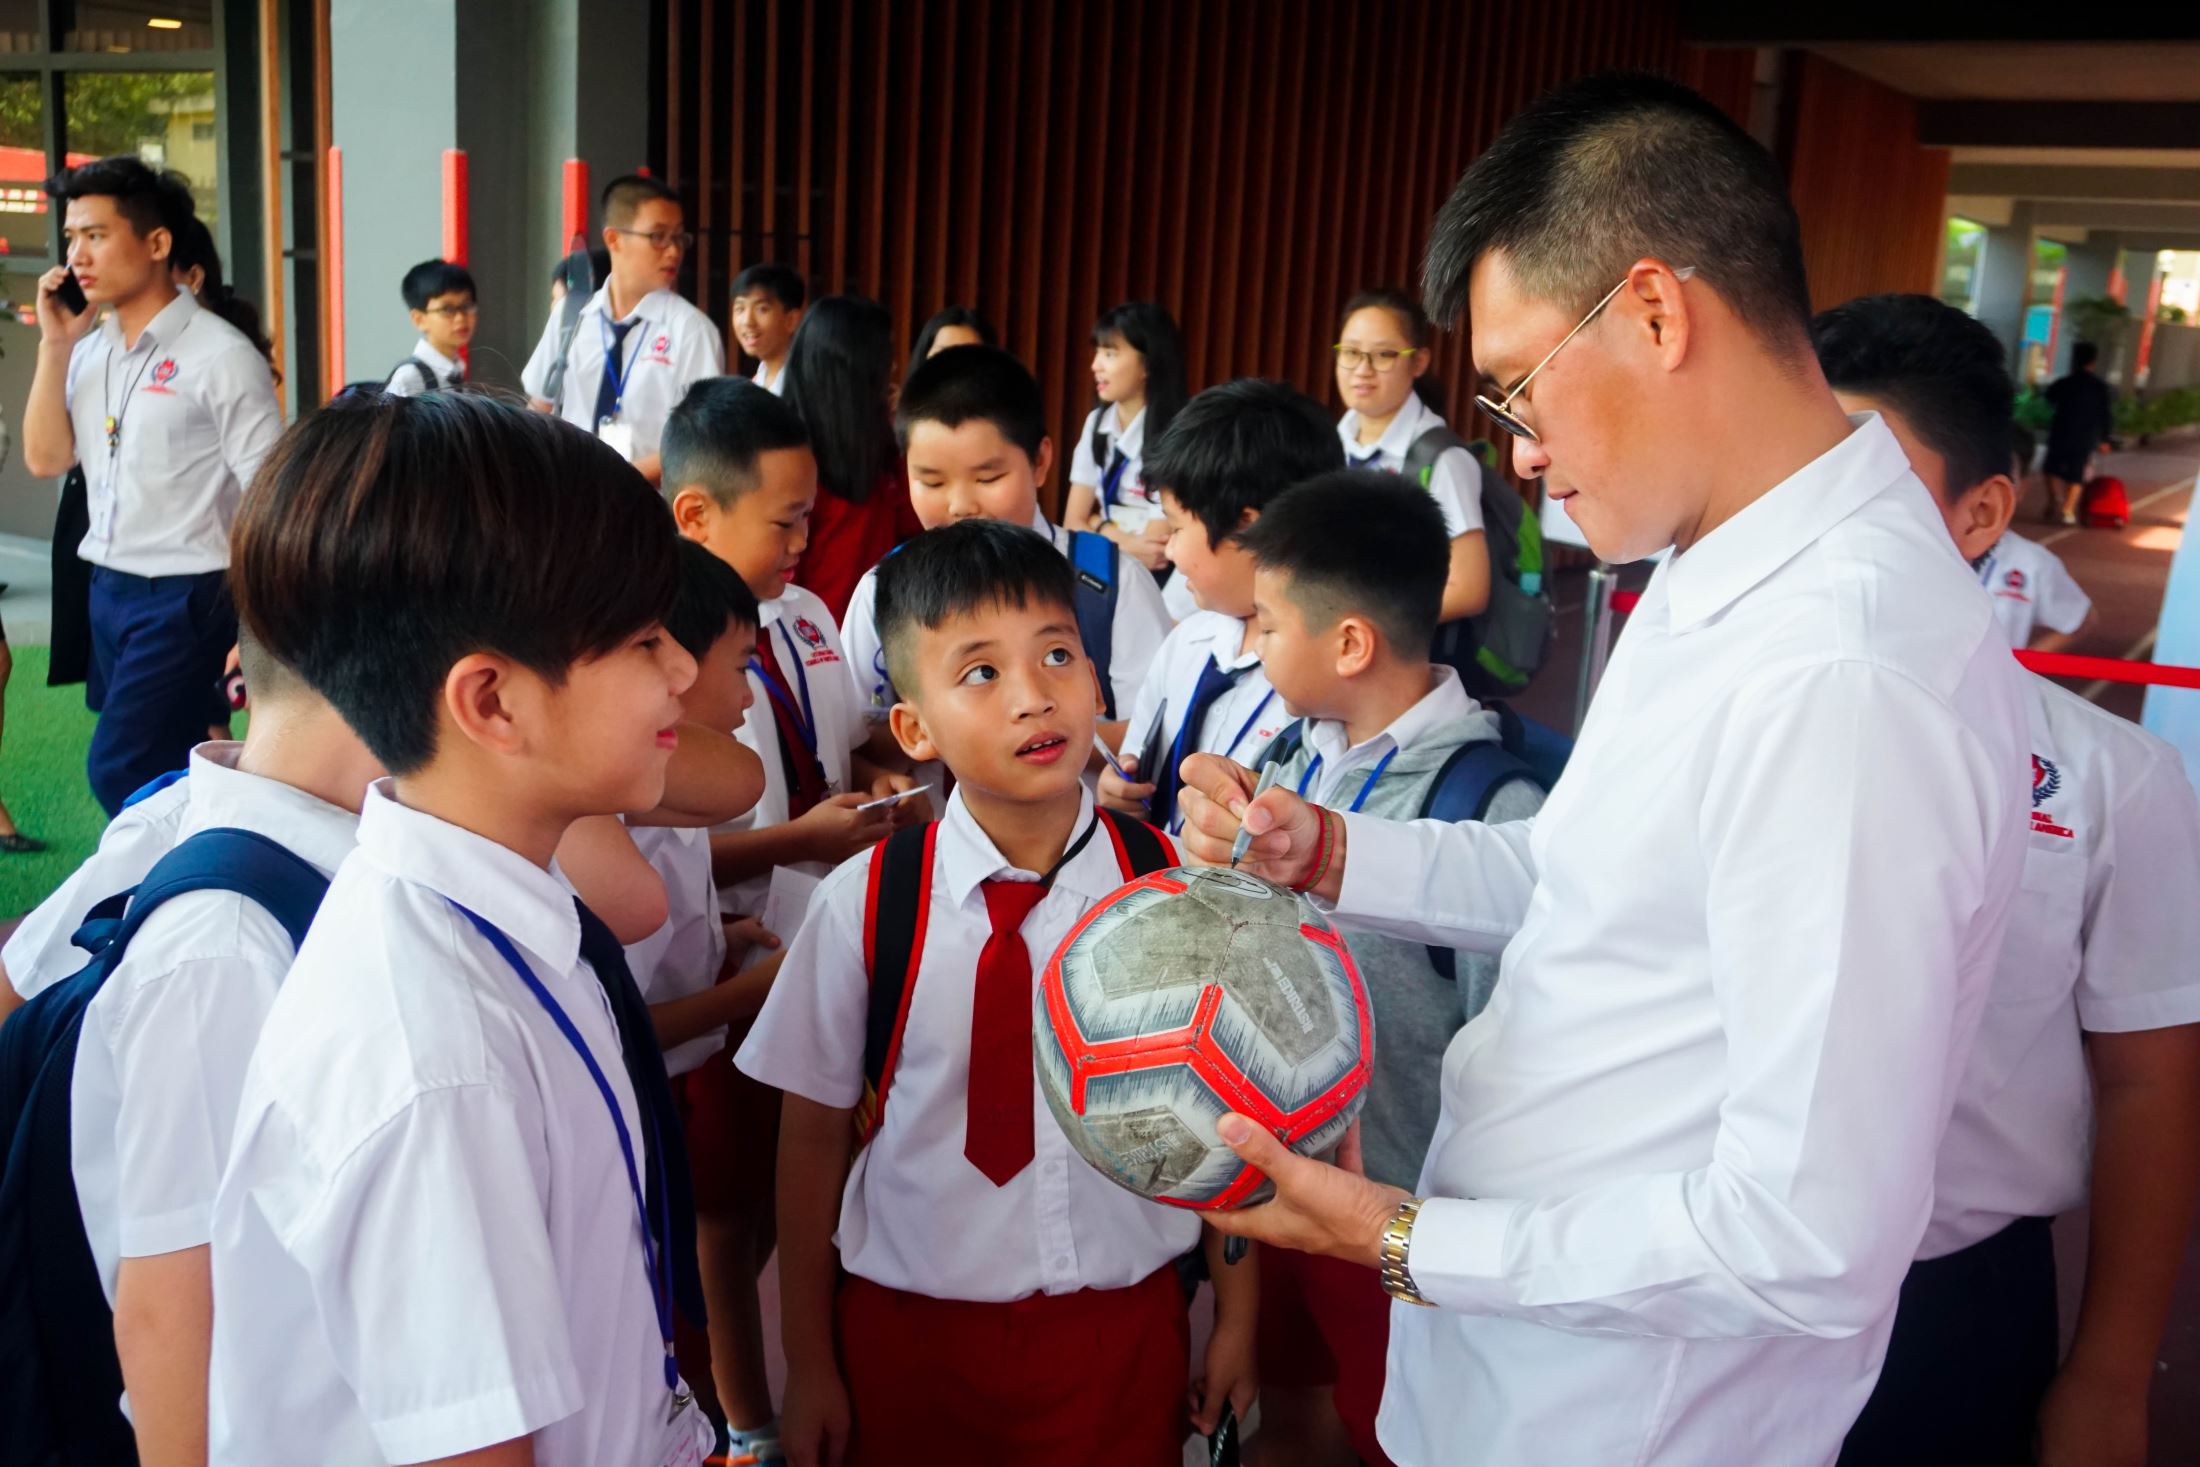 SNA students bringing their football ball to Cong Vinh to receive the signature.